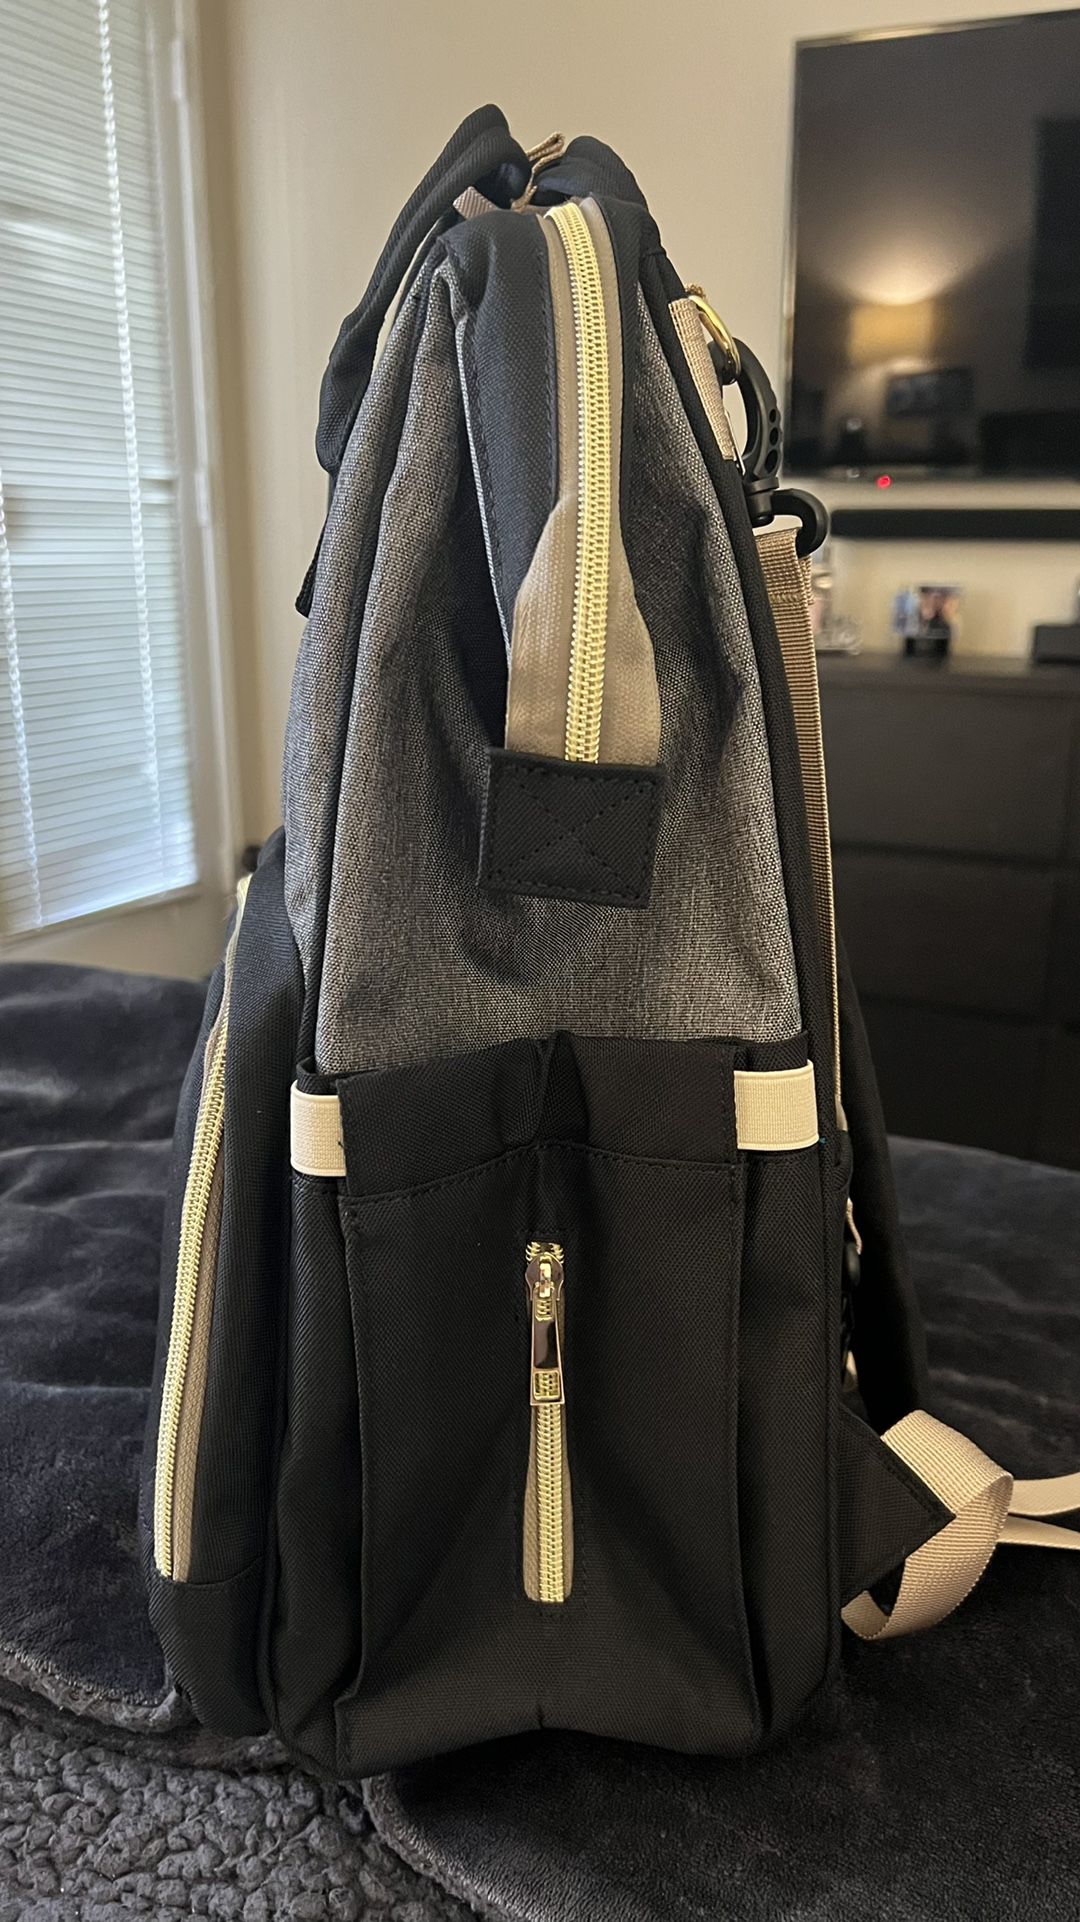 Diaper Bag for Sale in San Diego, CA - OfferUp